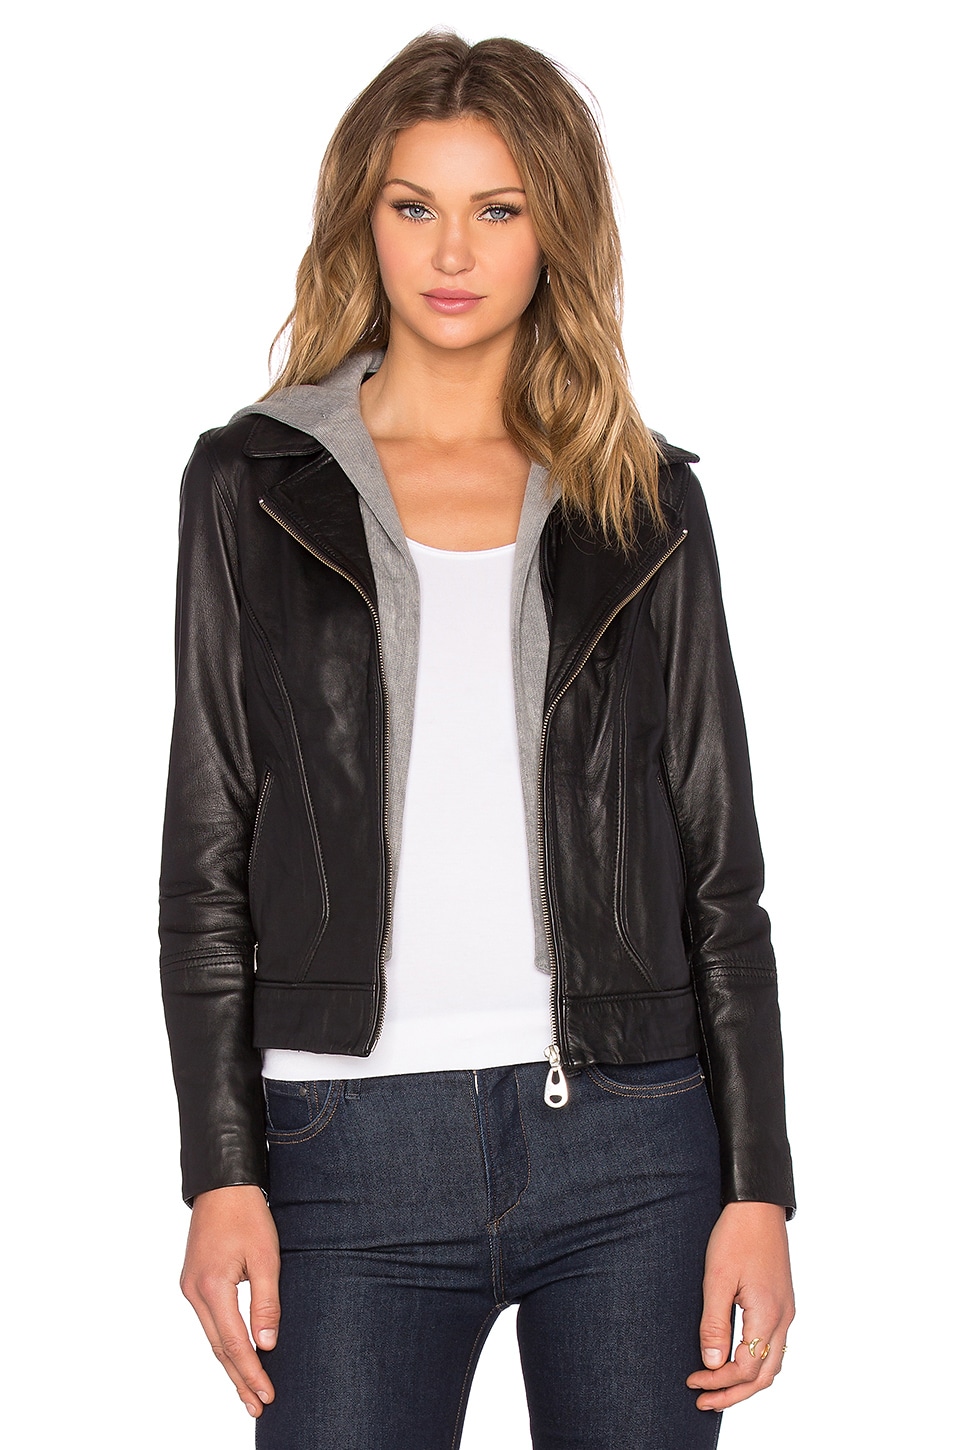 DOMA Hooded Leather Jacket in Black | REVOLVE